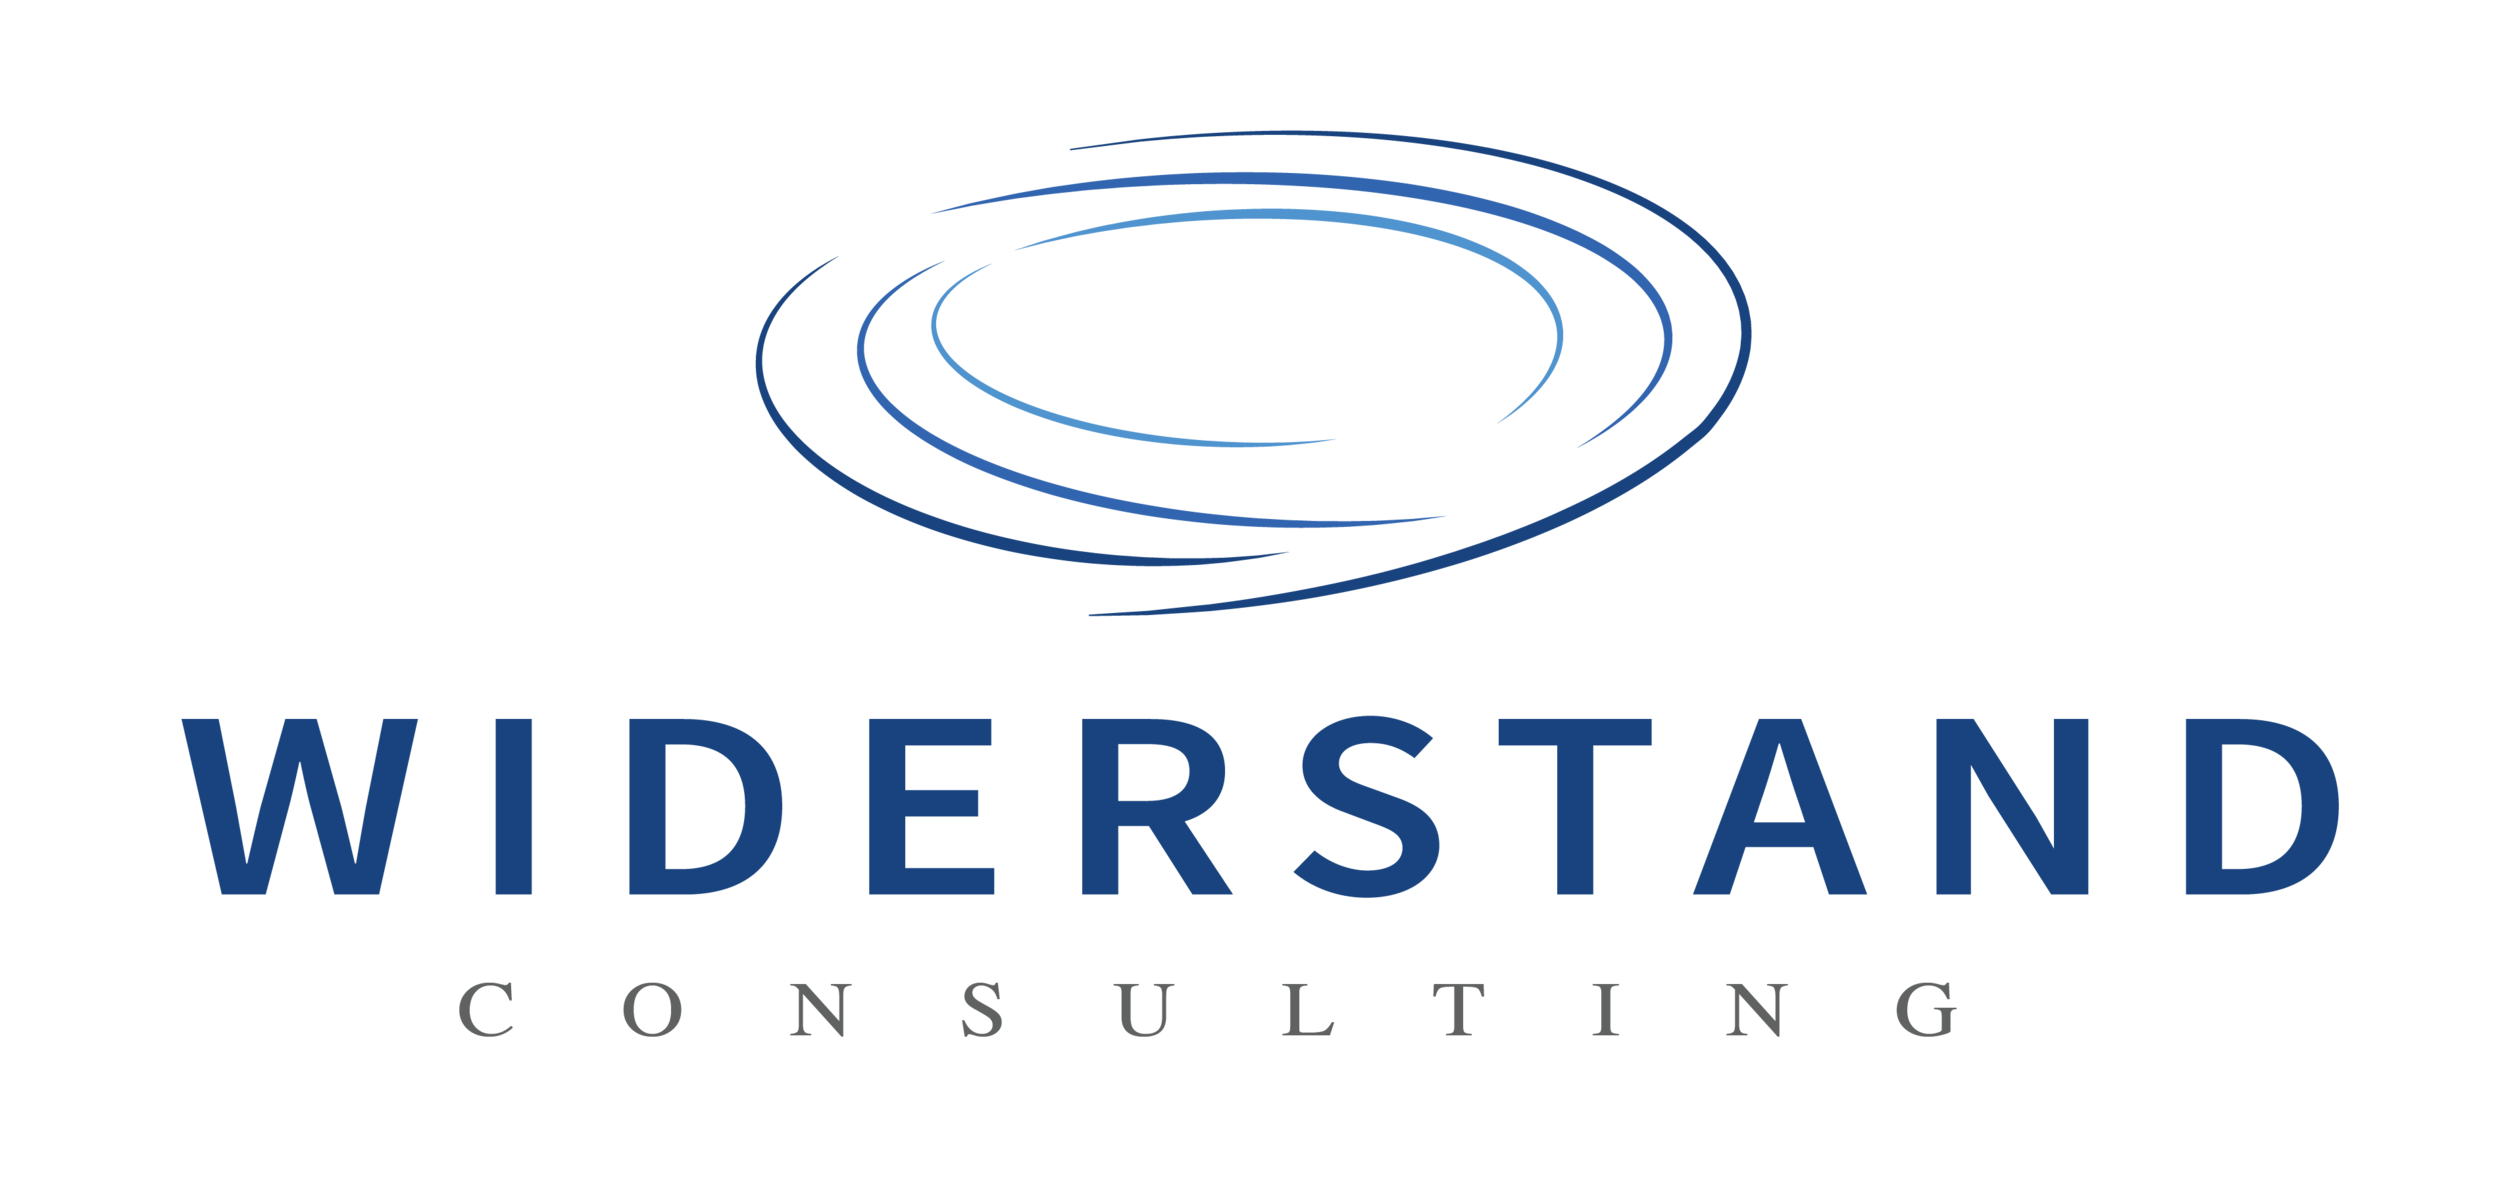 About — Widerstand Consulting